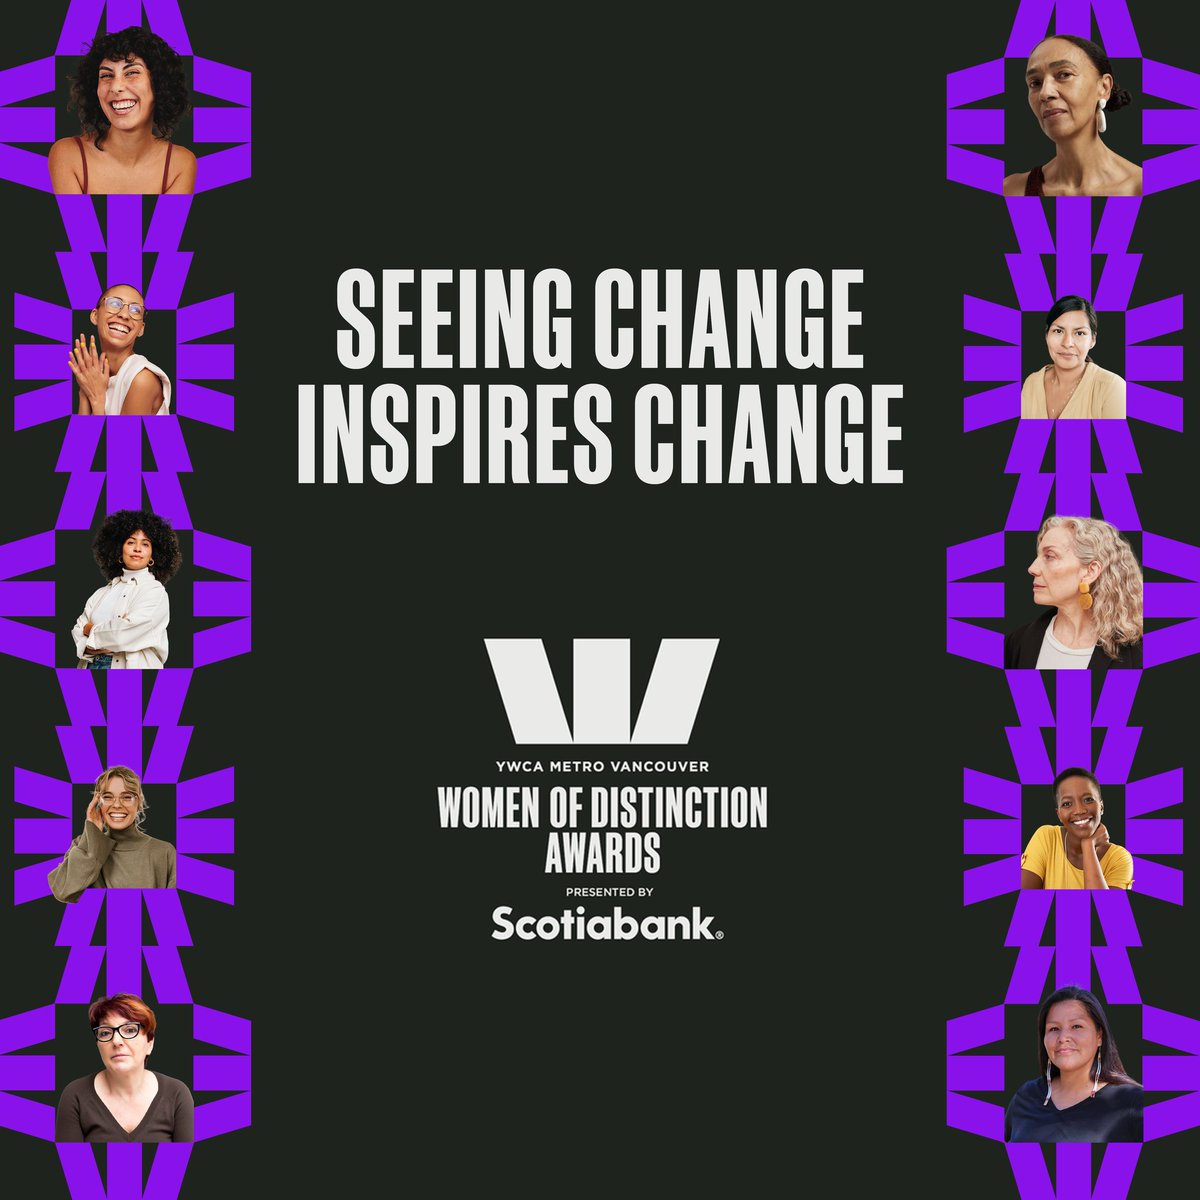 980 CKNW supports the @YWCAVAN Women of Distinction Awards Monday May 13th at the Westin Bayshore! The YWCA Women of Distinction Awards presented by Scotiabank is their premier fundraising event, honouring extraordinary women leaders and businesses. trib.al/nQGEMQM